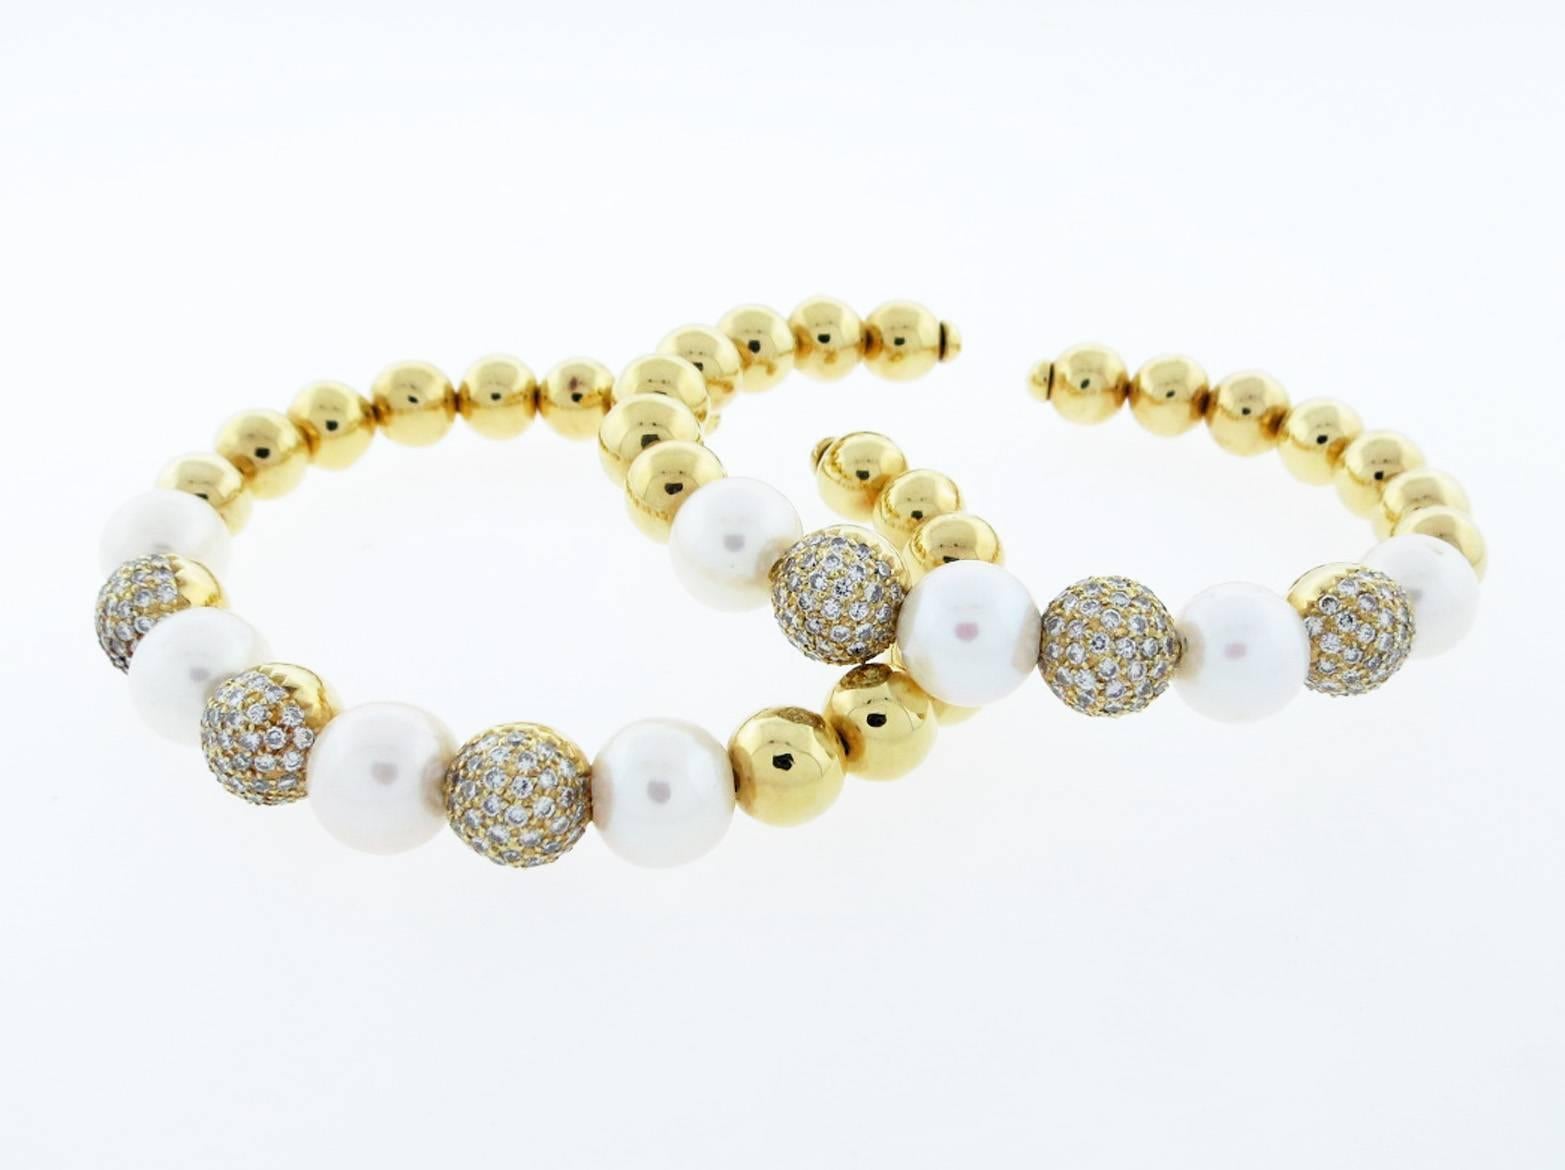  Contemporary pair of 18kt. yellow gold flexible cuff bracelets. Each bracelet is strung with five 10mm. cultured pearls with three alternating diamond pave balls across the top. The diamond balls are bead set with 36 round brilliant cut diamonds.